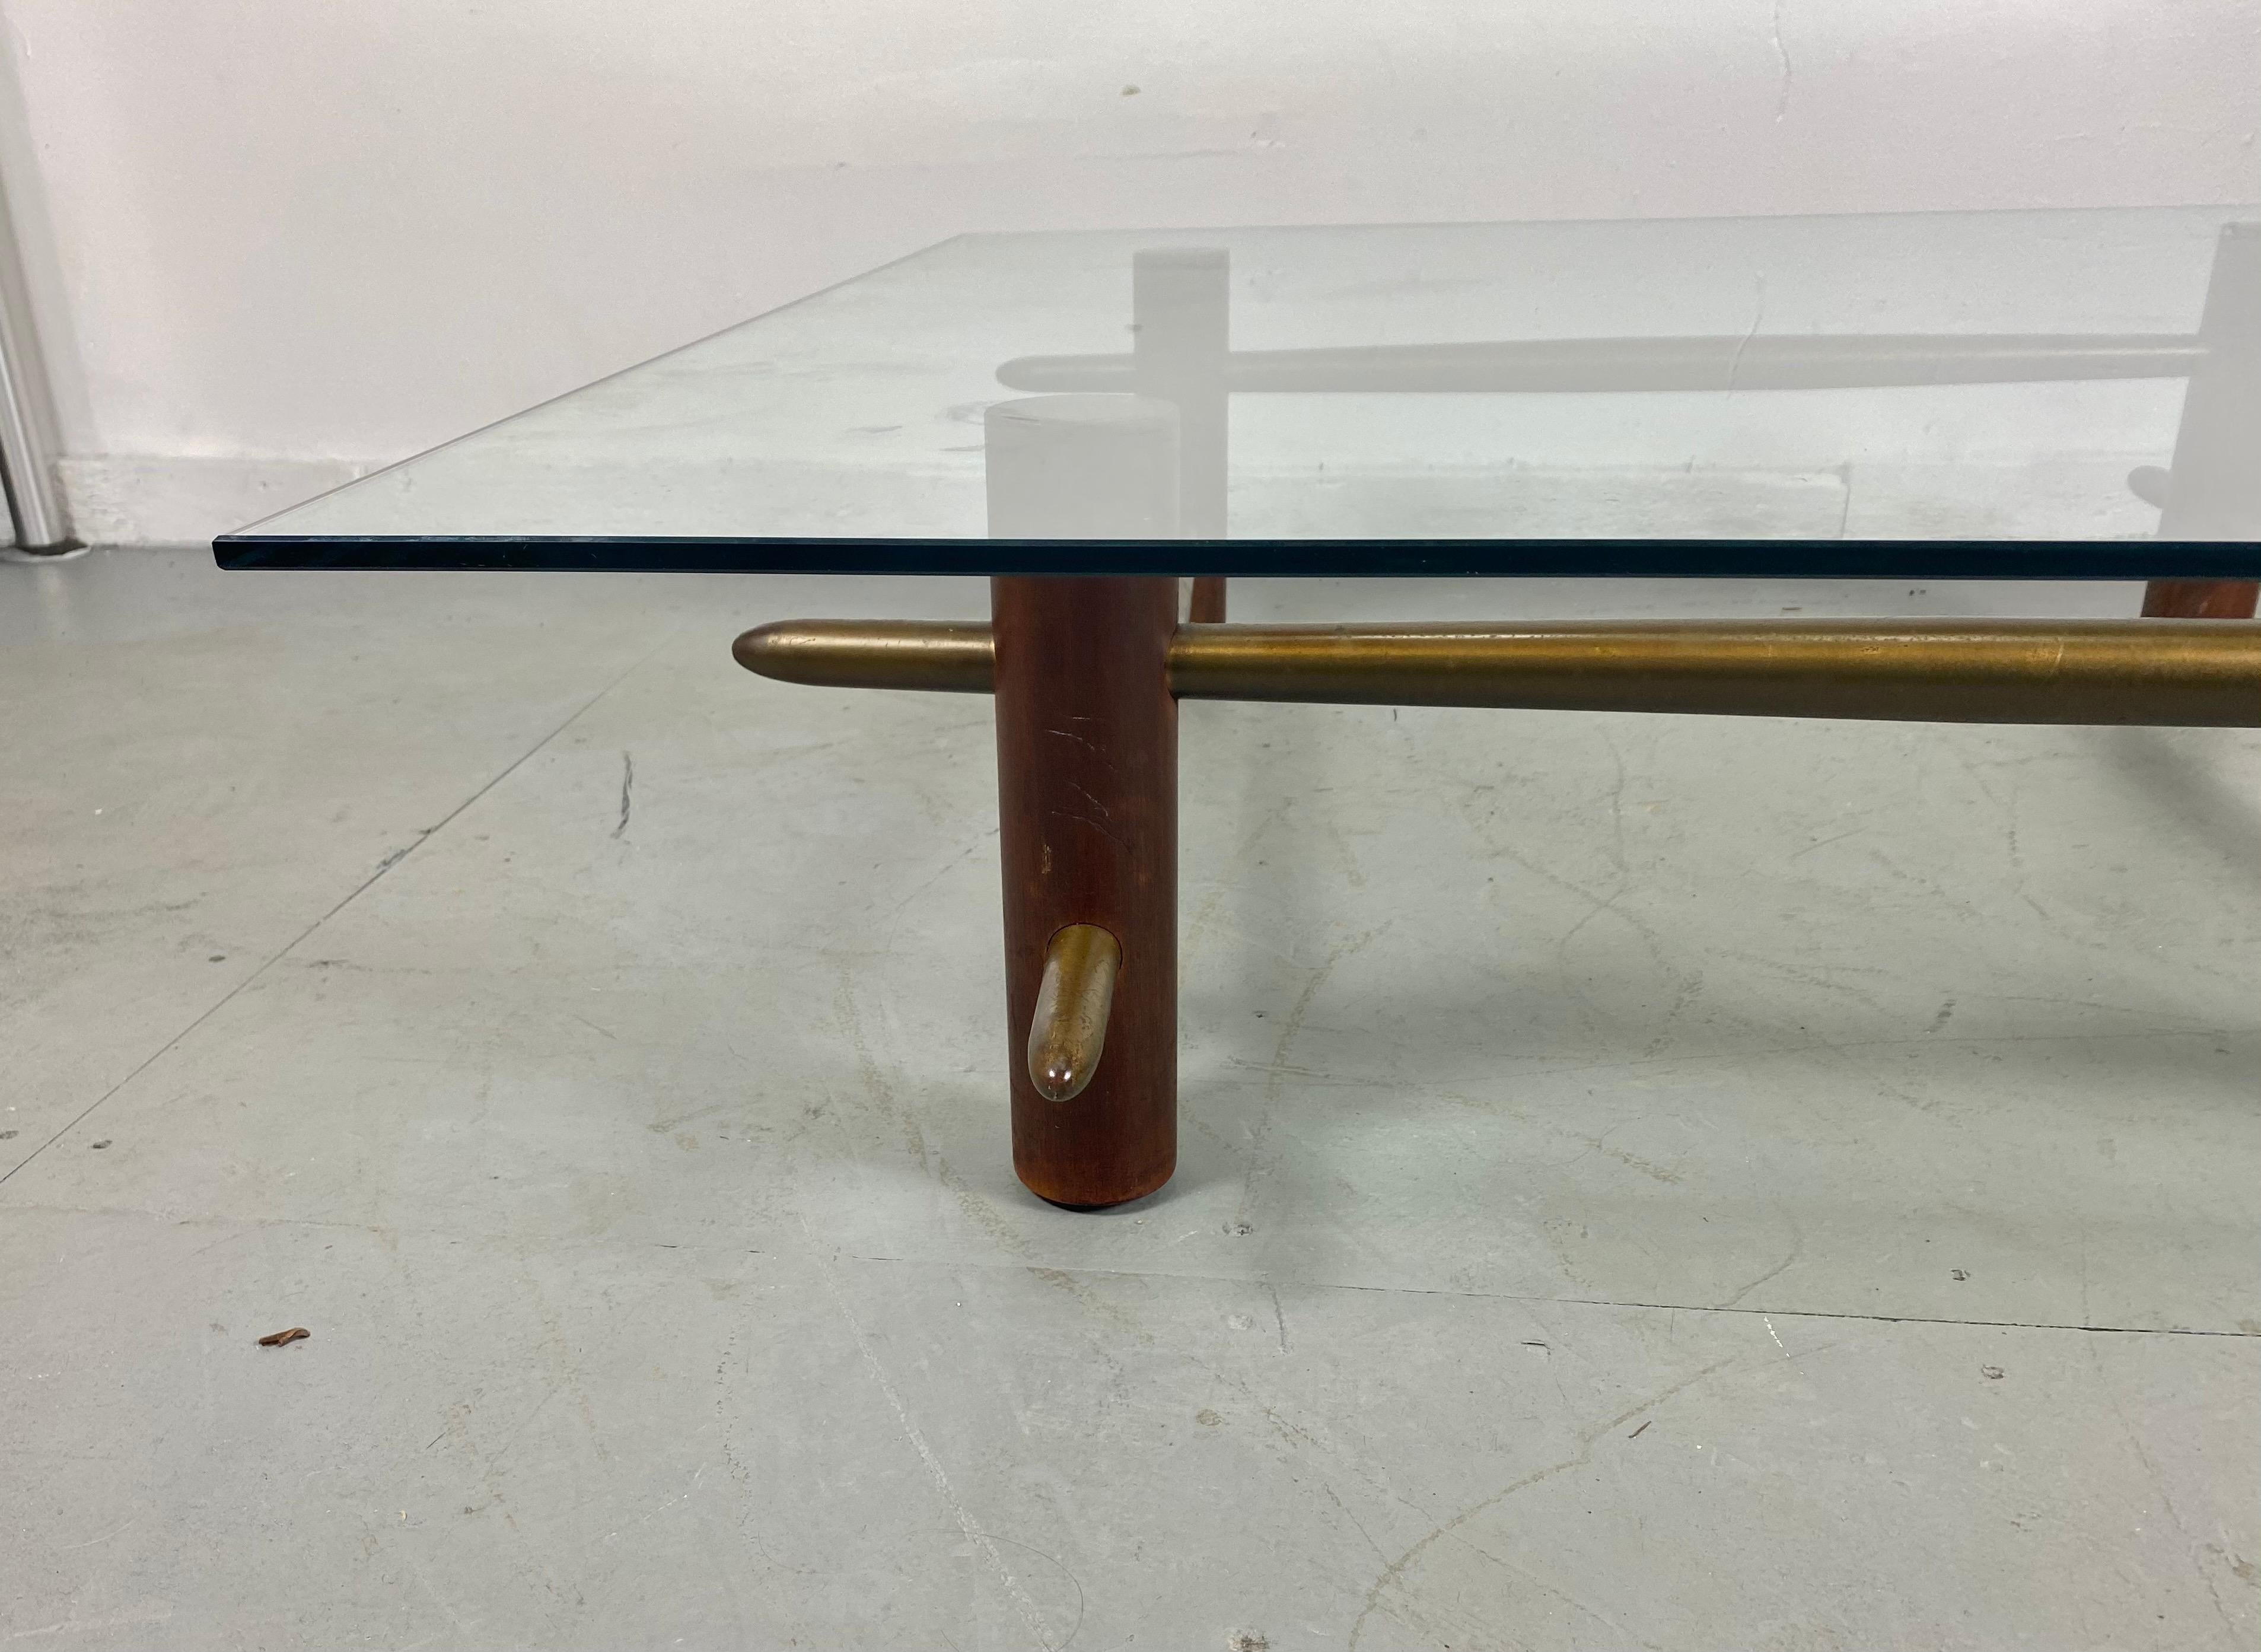 Rare, early and important, coffee table designed by Robsjohn Gibbings for Widdicomb 1952, Model 1640. The base is comprised of solid mahogany pillars penetrated by solid brass bars. Base retains original finish /patina. solid brass bars can be